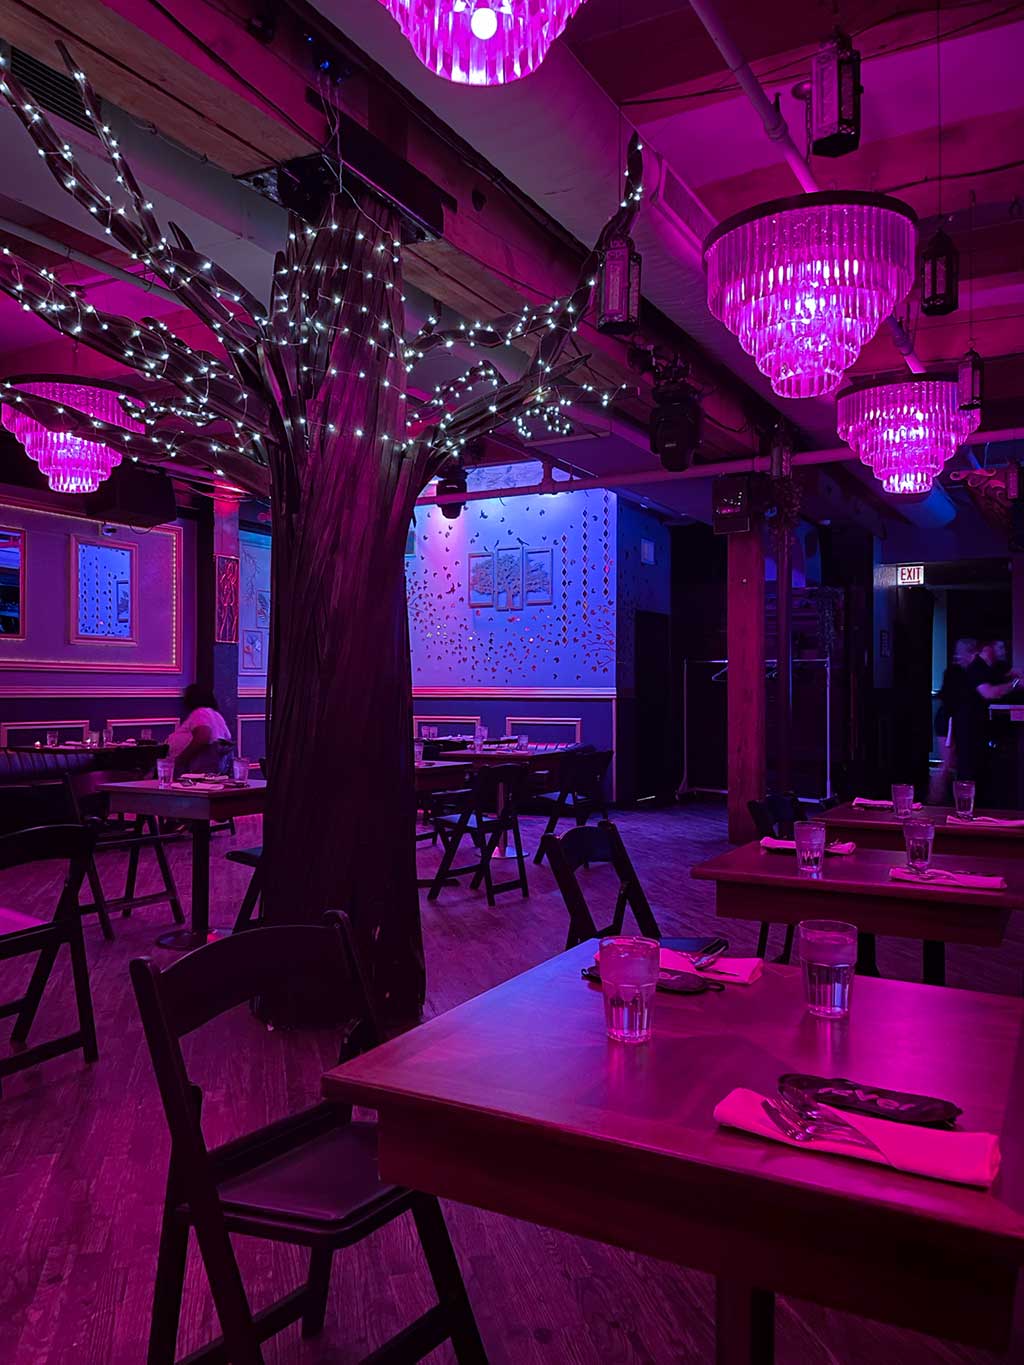 drive-swim-fly-chicago-dining-in-the-dark-fever-hubbard-inn-river-north-dining-room-pink-light-chandeliers